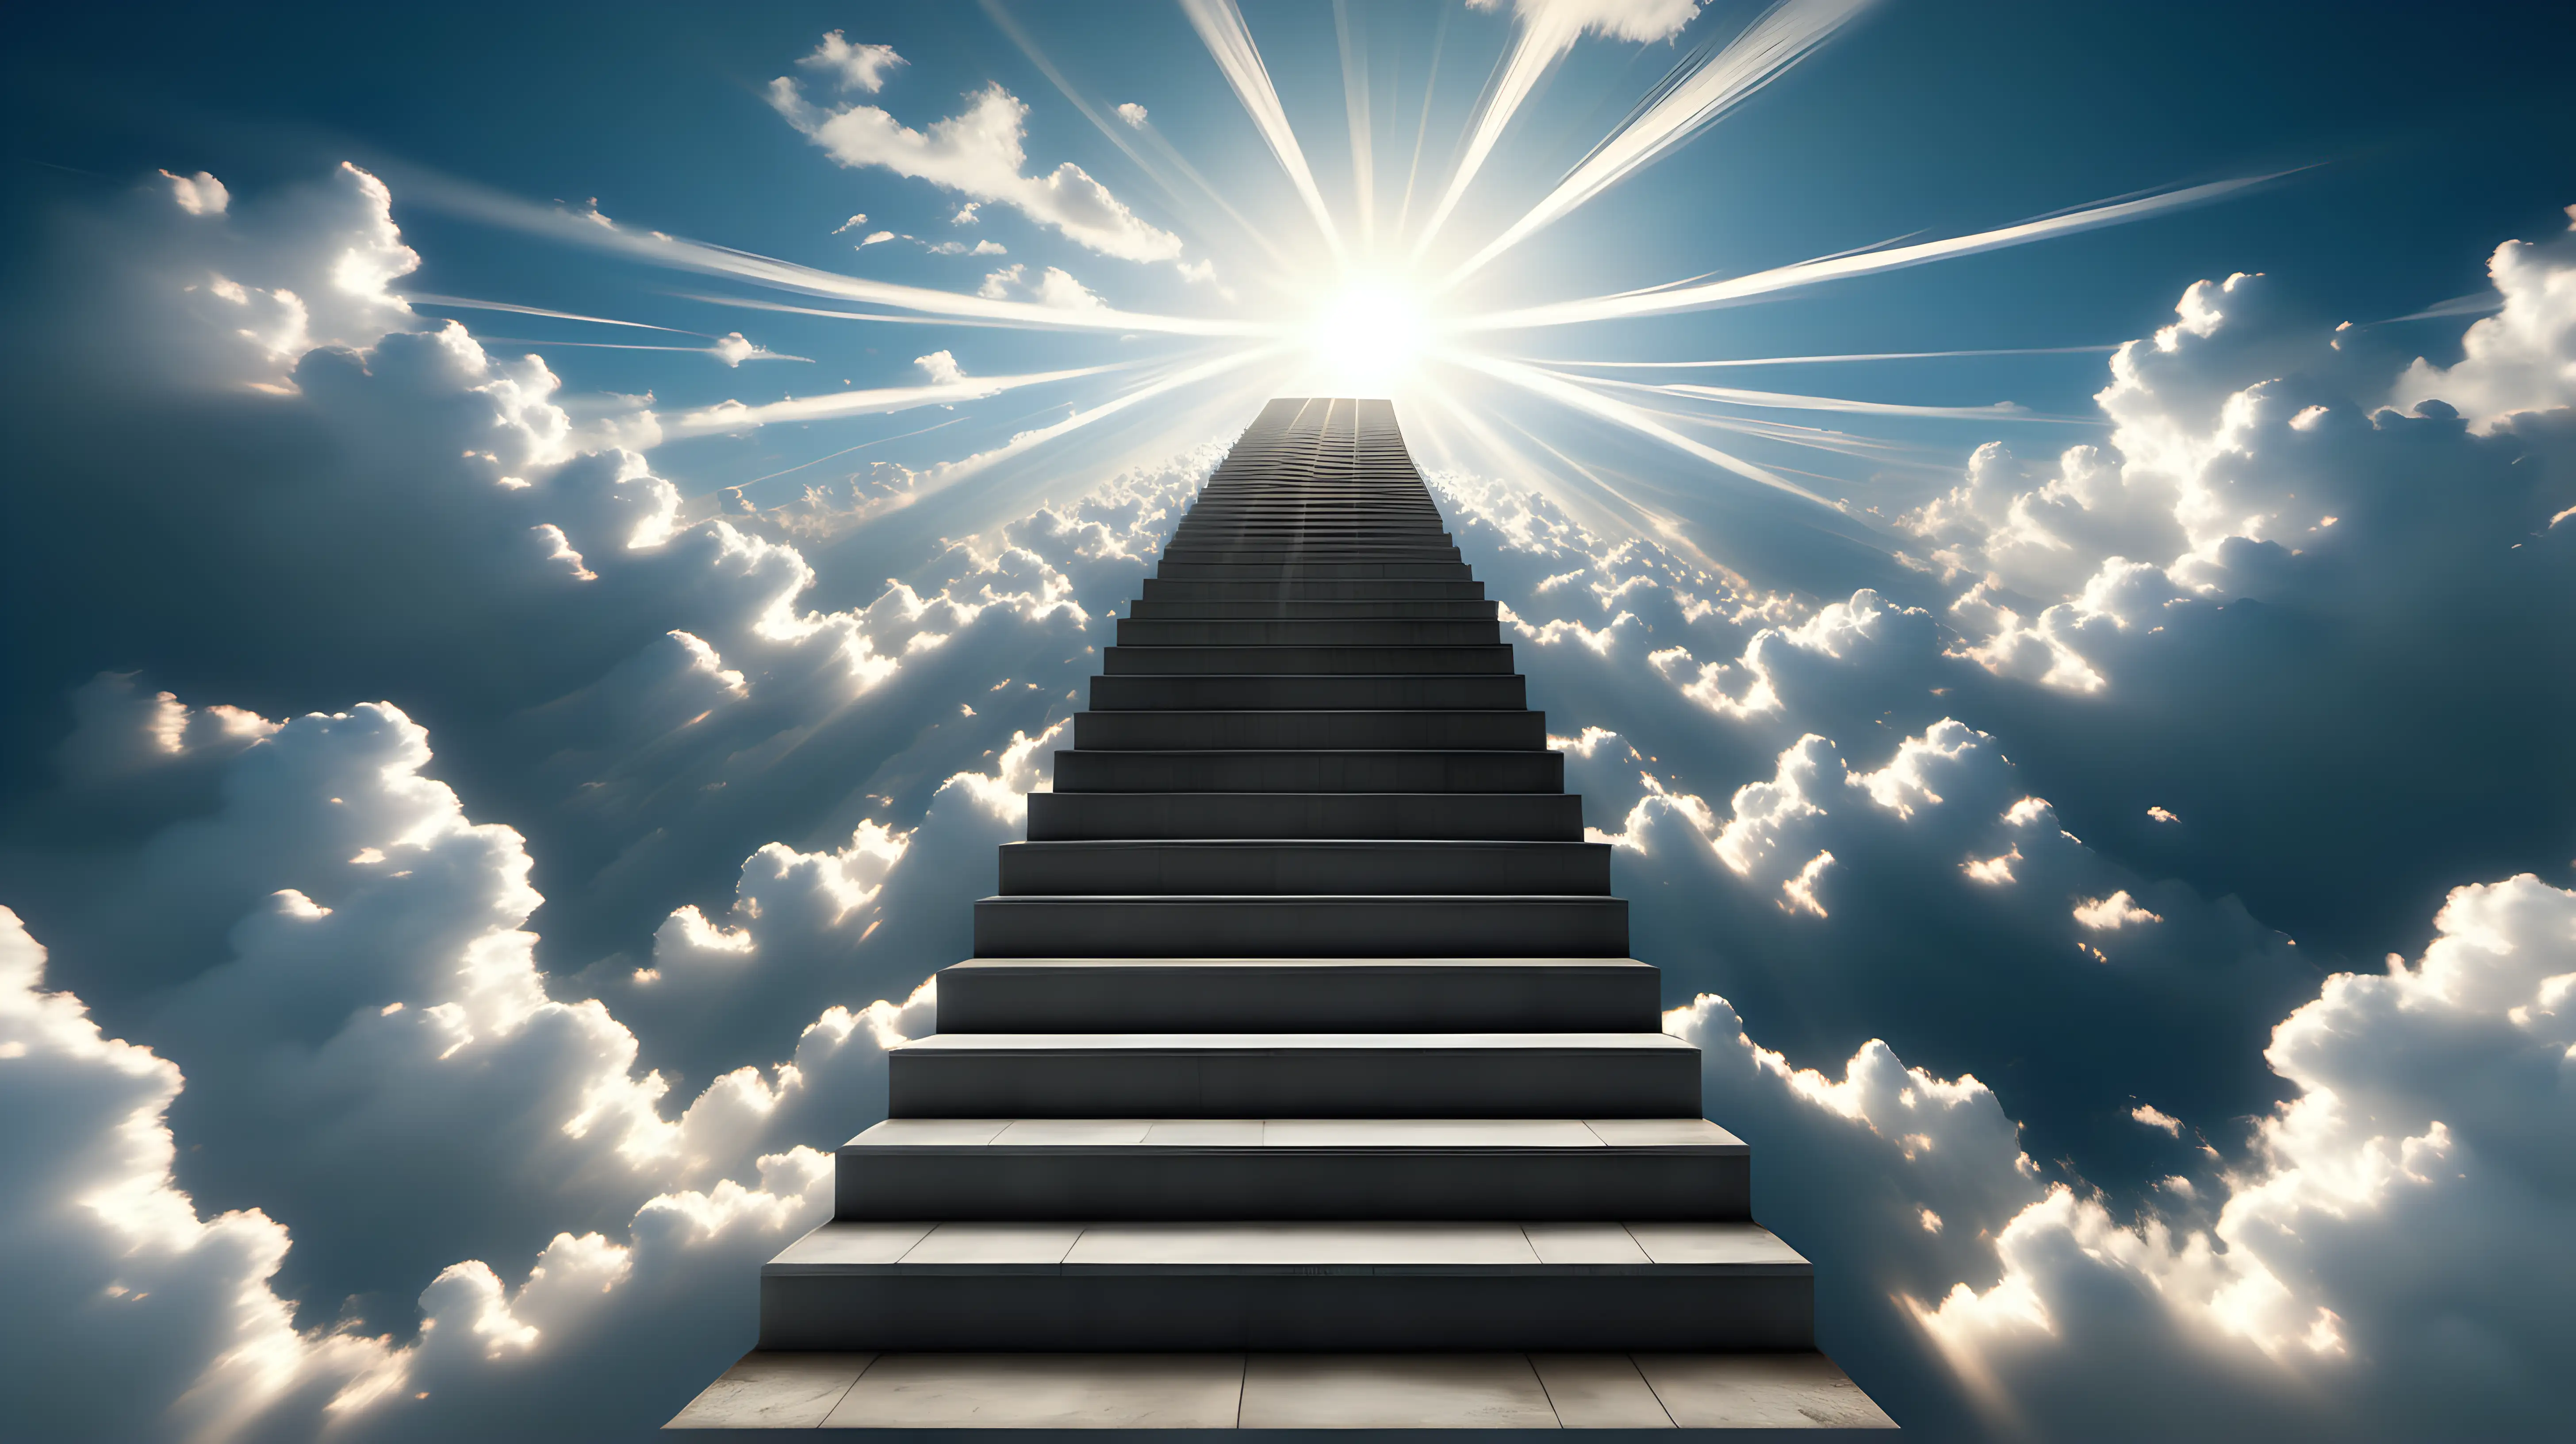 Surreal Infinite Staircase Under Azure Sky Photorealistic Architectural Wonder